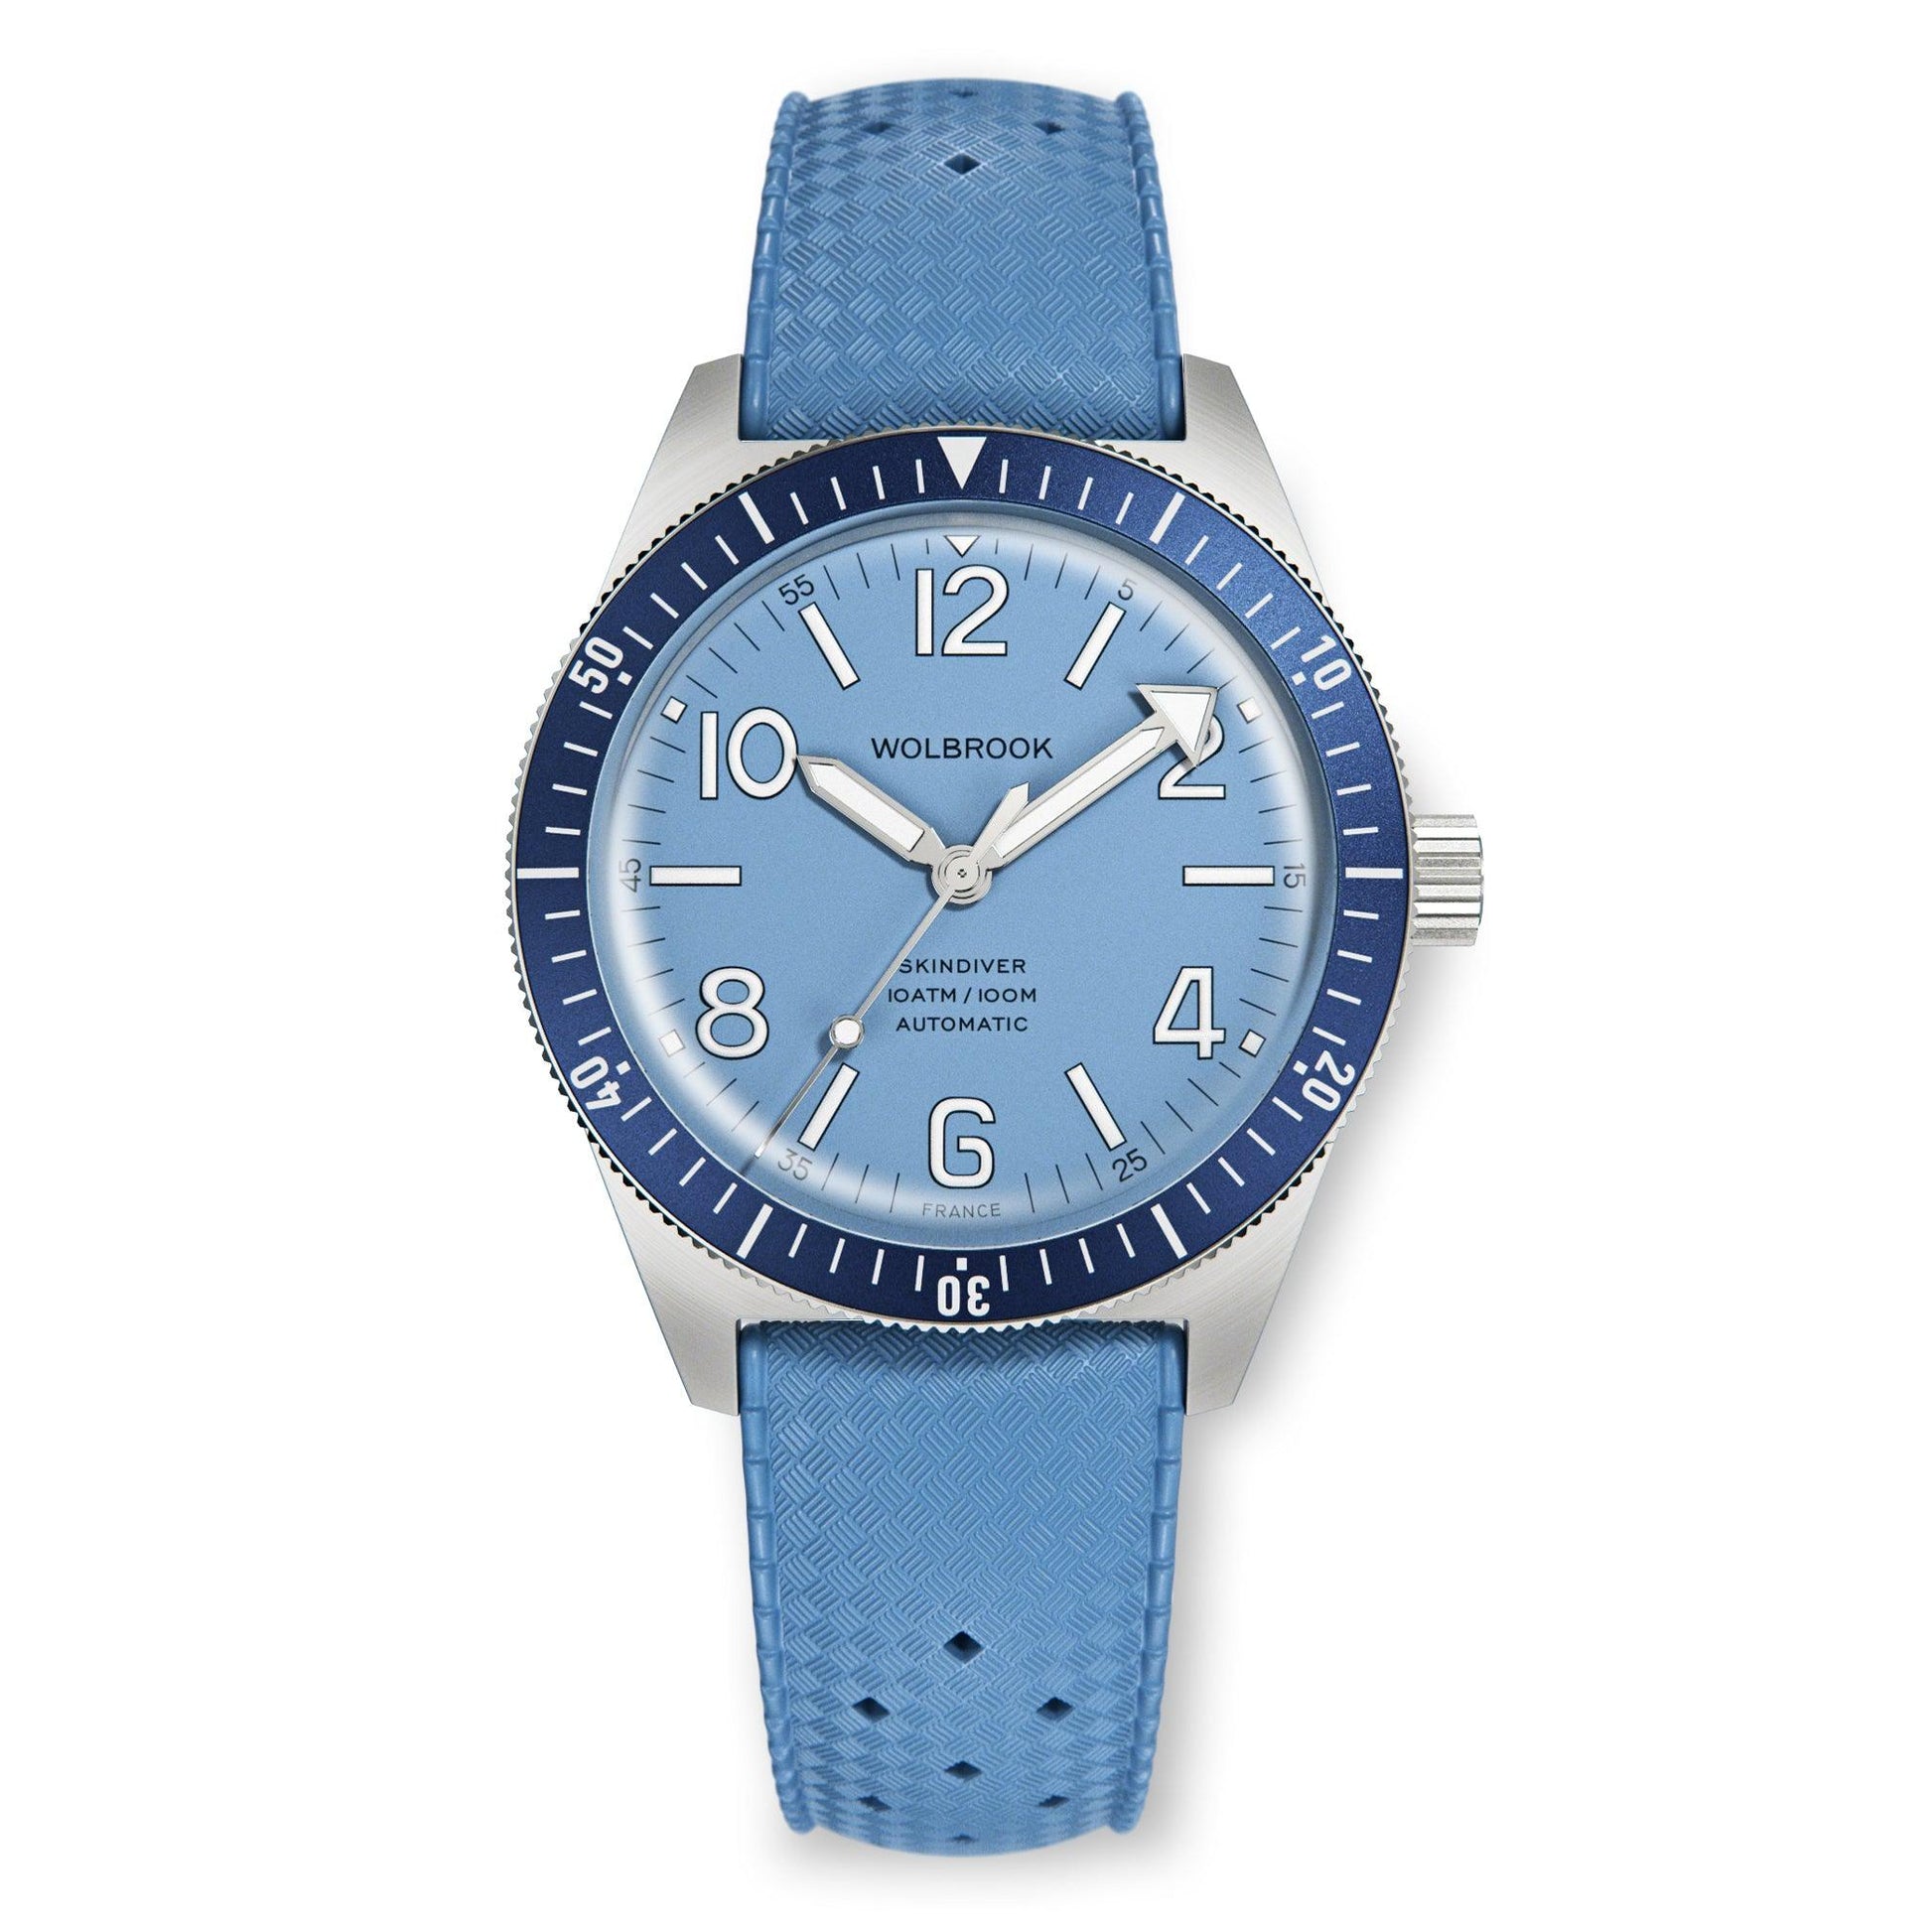 Skindiver Automatic Watch – Sky Blue & Dark Blue Bezel - Wolbrook Watches